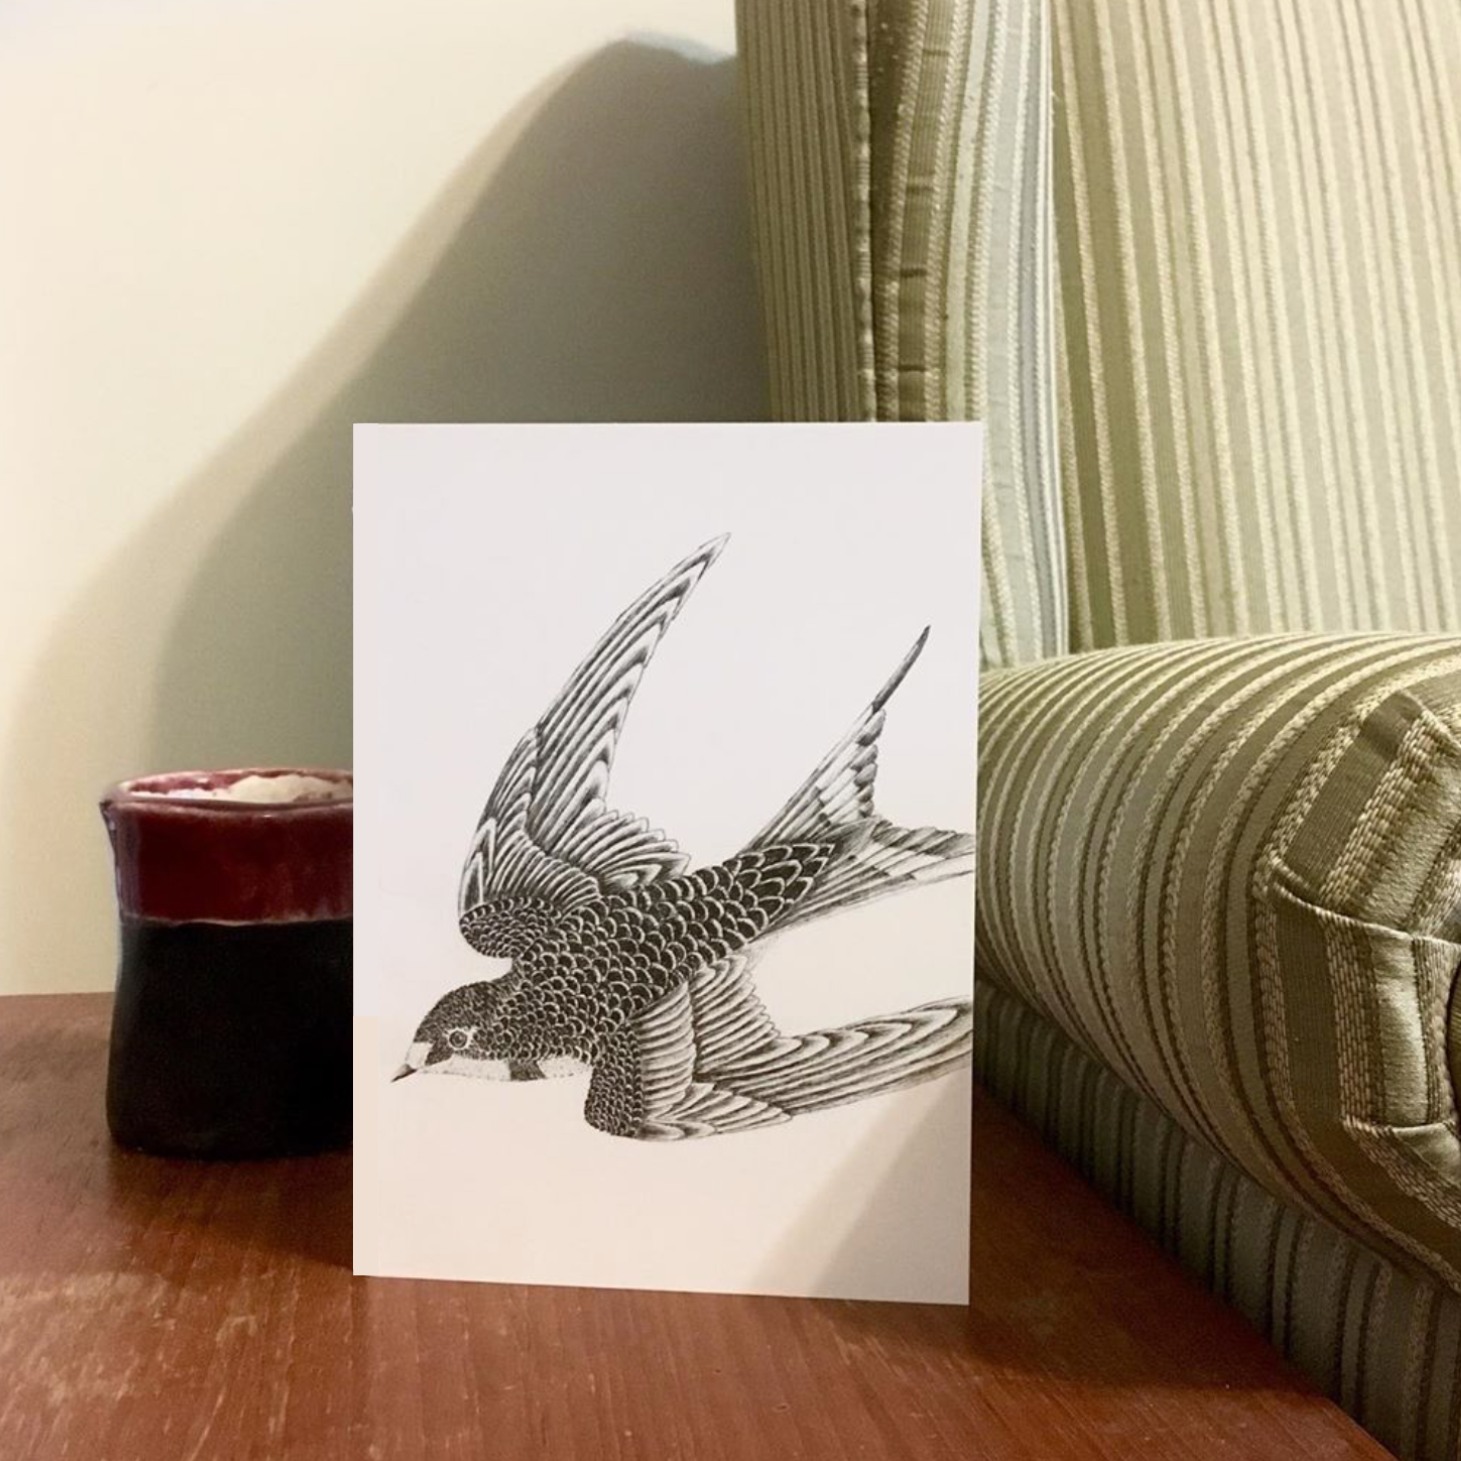 Swallow Card